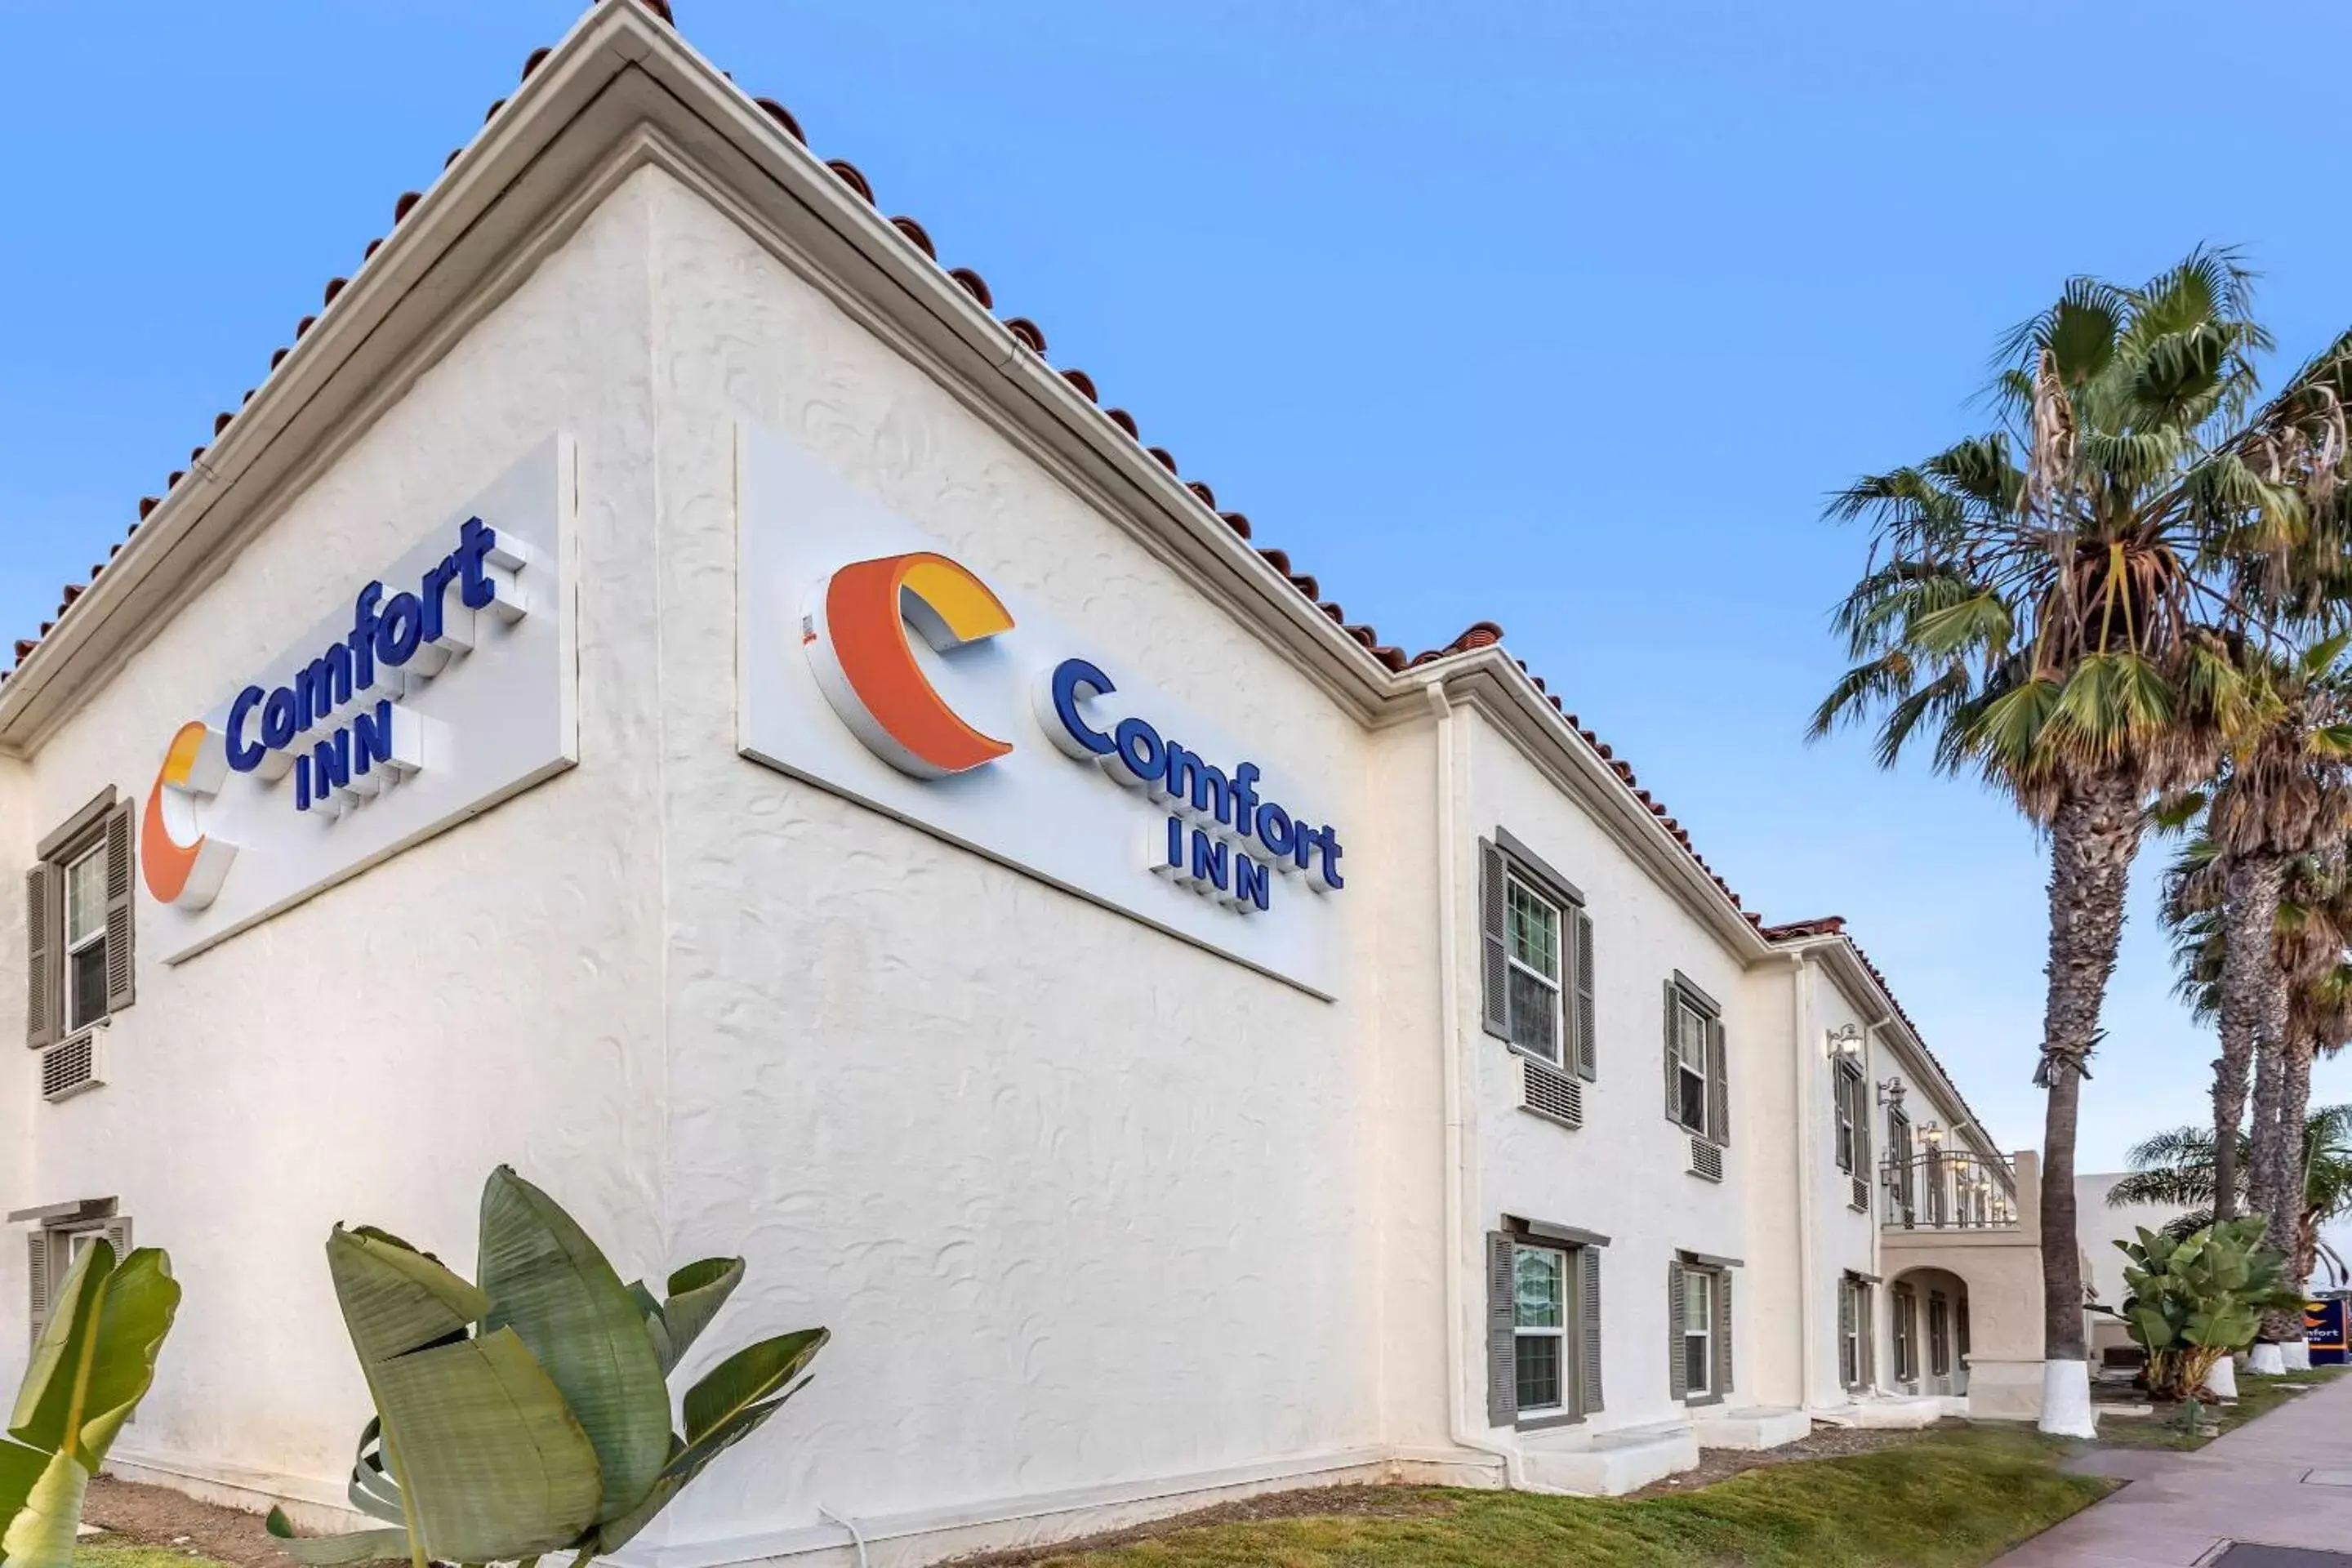 Property building in Comfort Inn San Diego Old Town